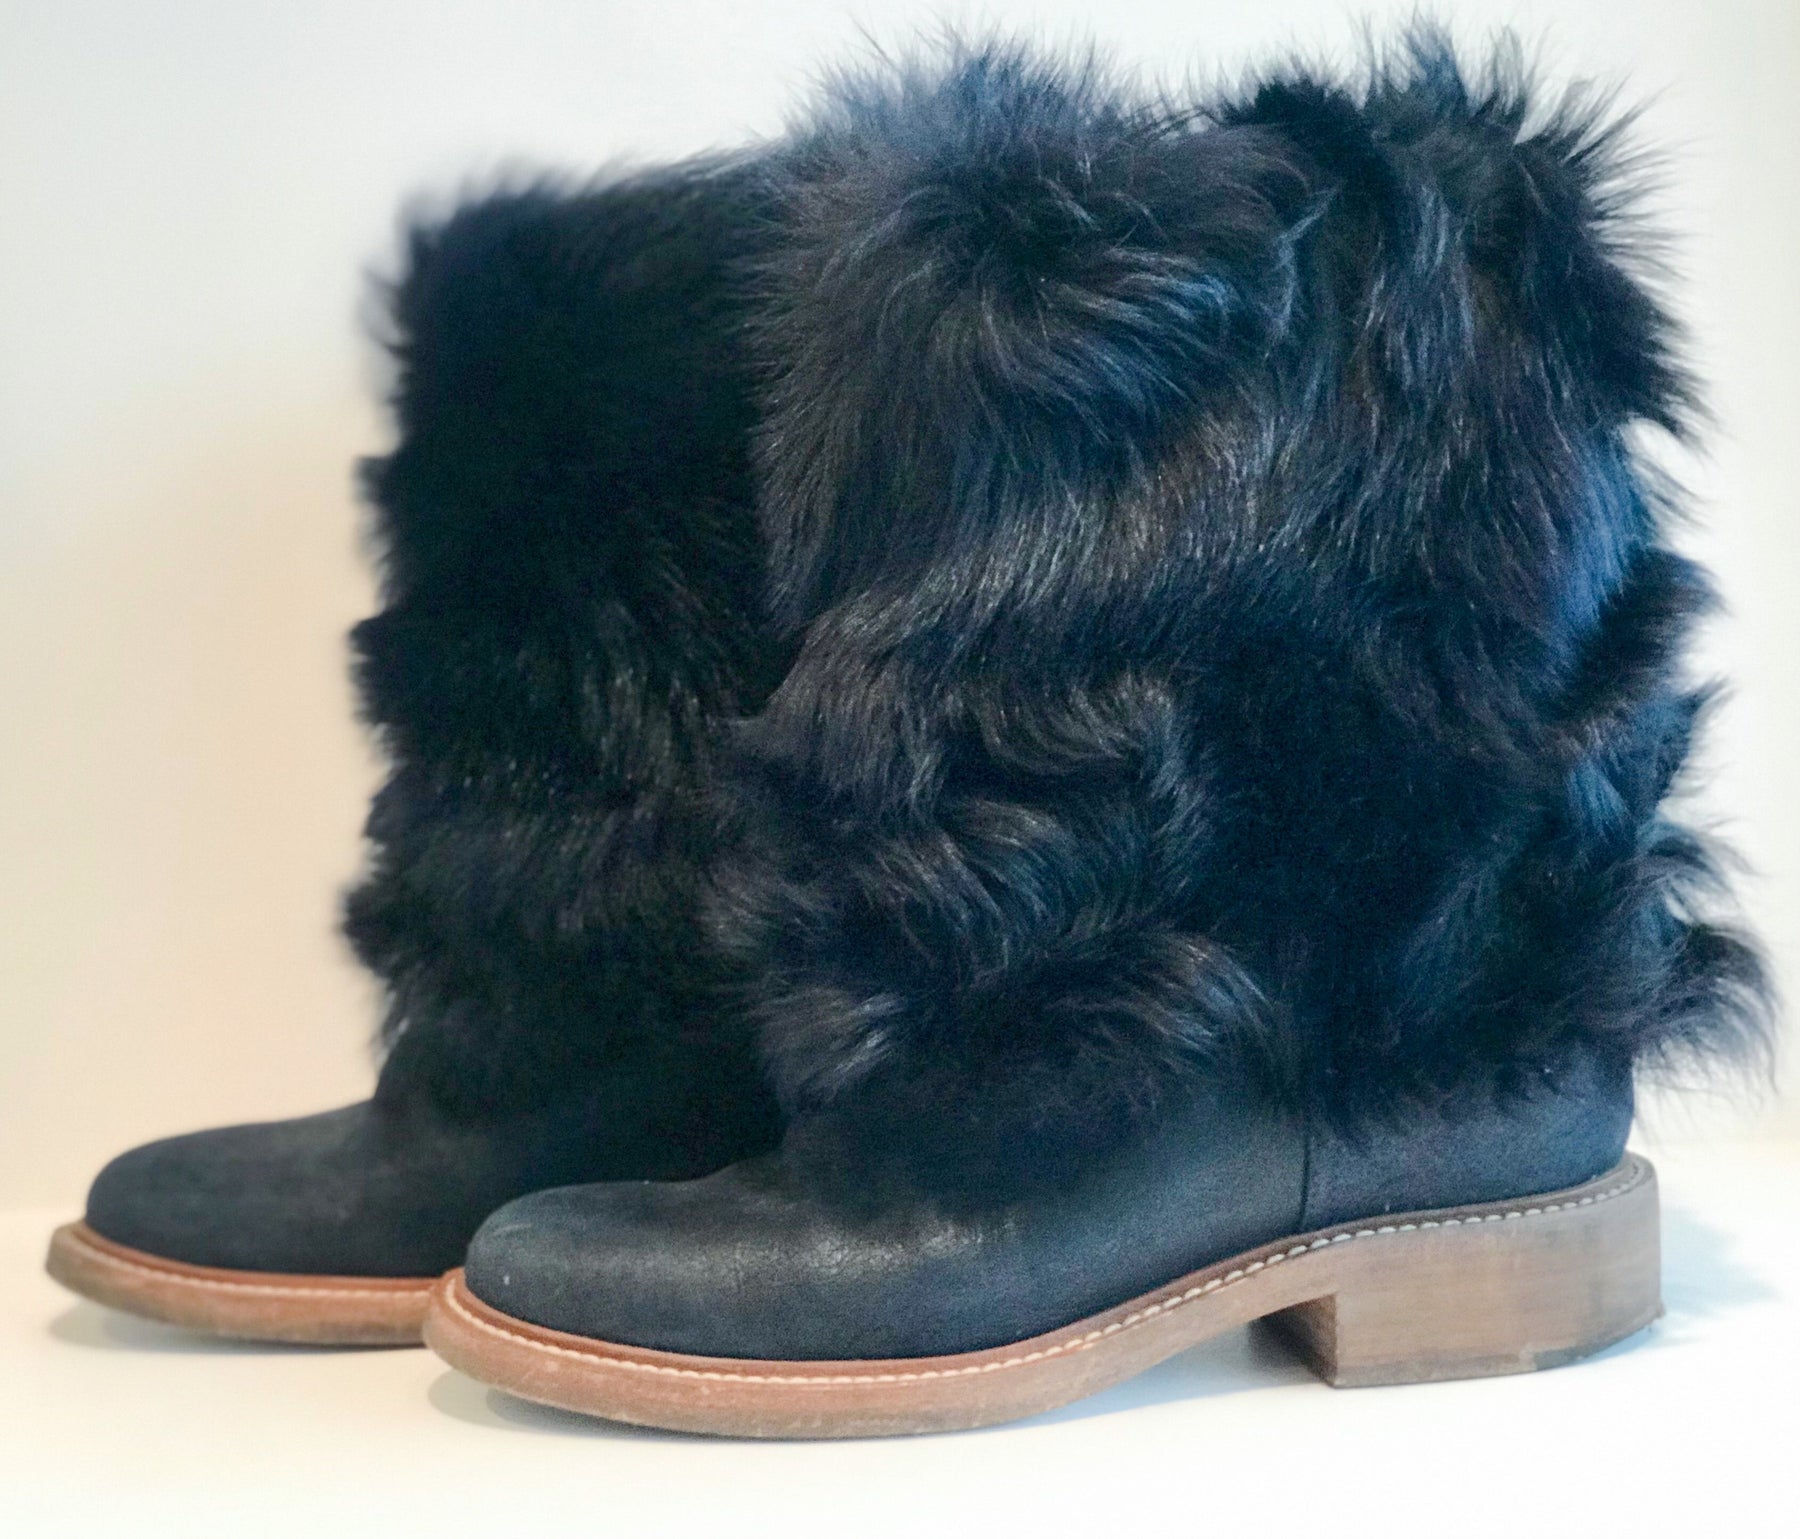 Chanel Fur Boots Navy Blue Side of Shoes